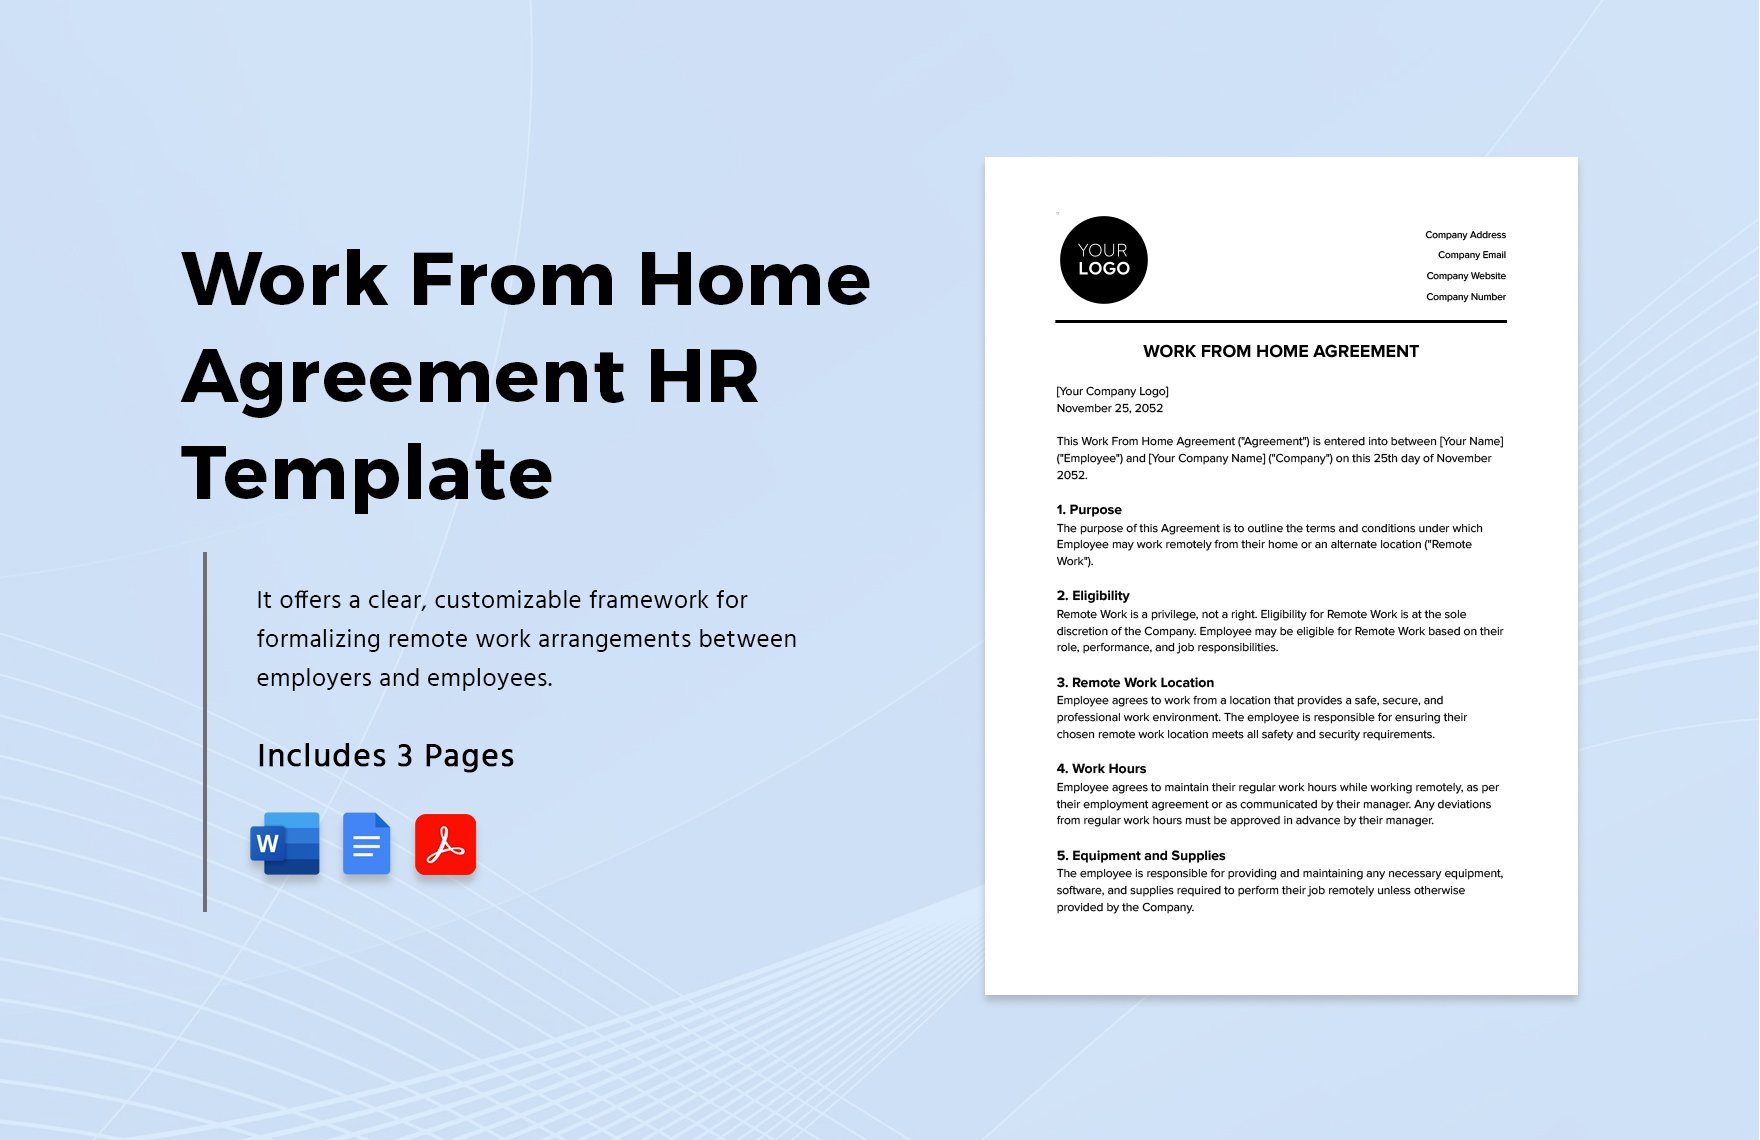 Work From Home Agreement HR Template